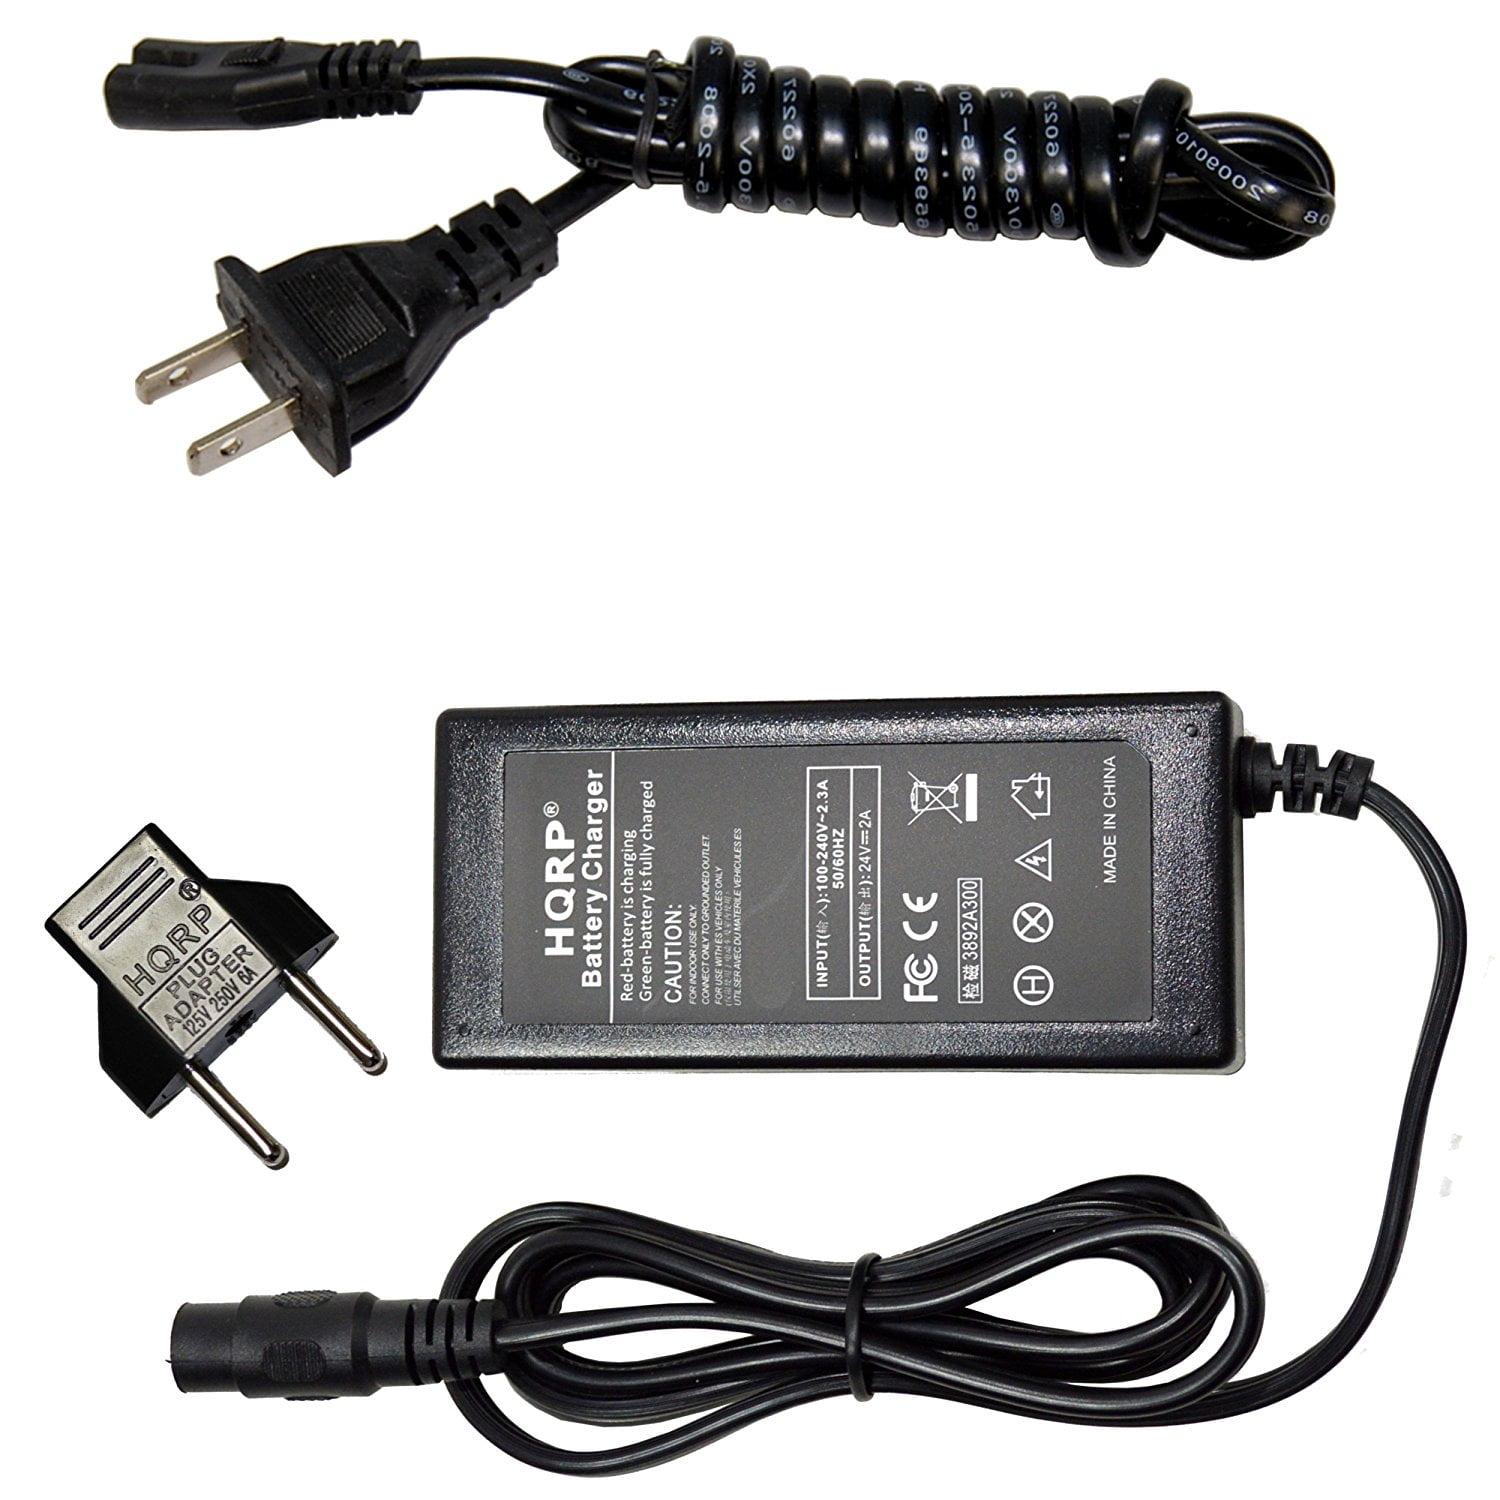 HQRP 24 Volt 3-Prong Fast Battery Charger Razor Qili QL-09009-B2401500H Replacement, Adapter Supply Cord Electric Scooter HQRP Euro Plug Adapter - Walmart.com